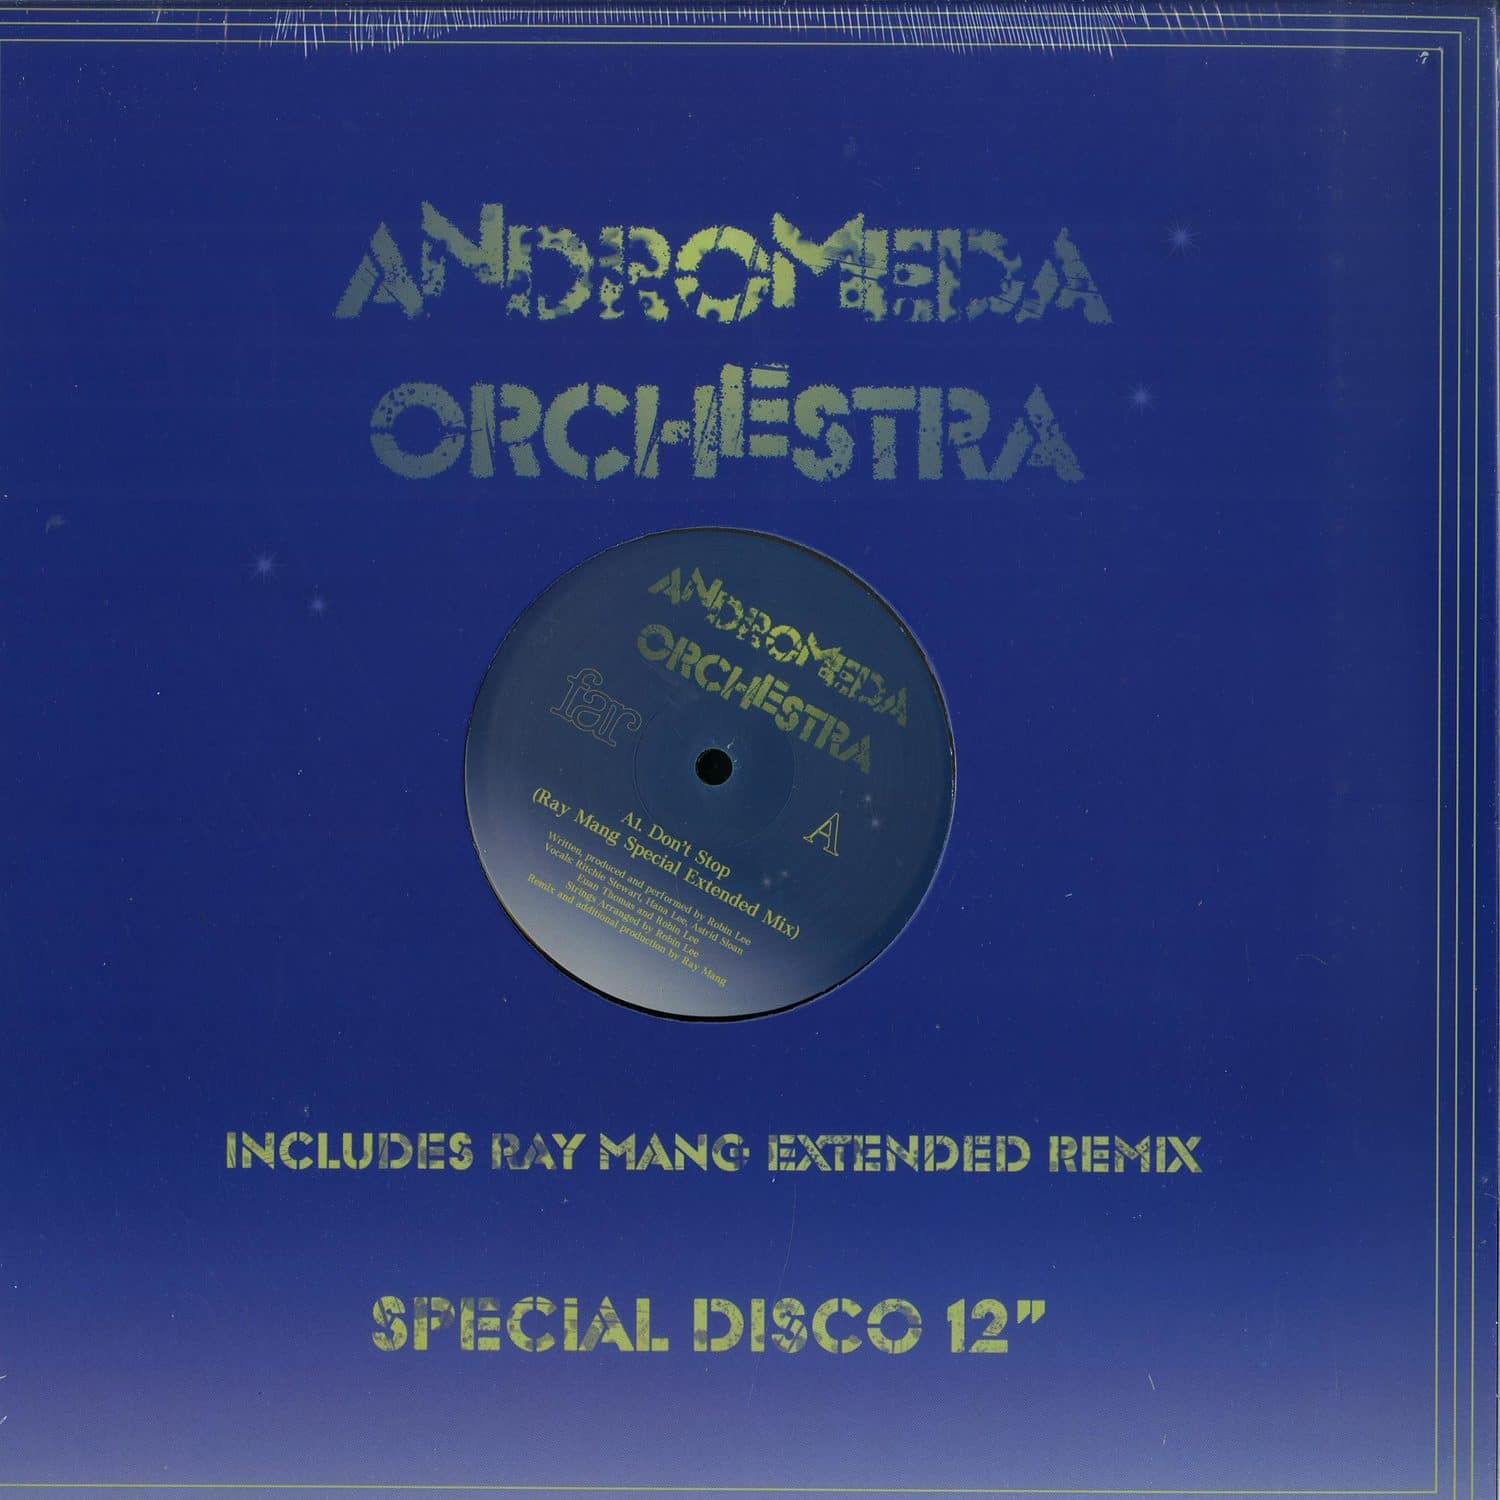 Andromeda Orchestra - DONT STOP 